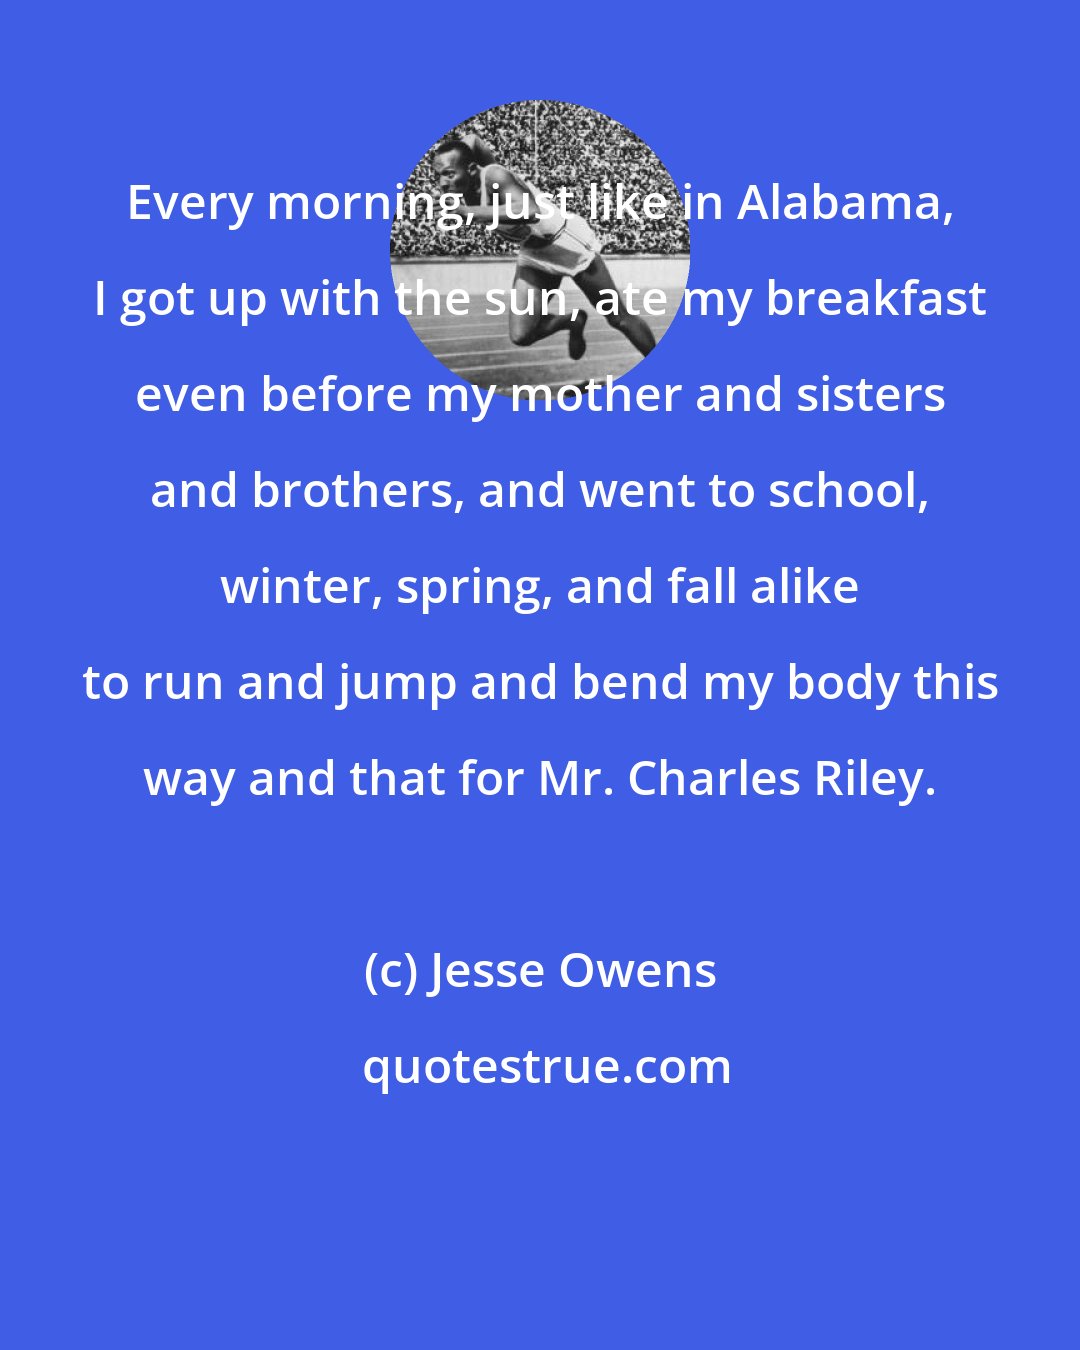 Jesse Owens: Every morning, just like in Alabama, I got up with the sun, ate my breakfast even before my mother and sisters and brothers, and went to school, winter, spring, and fall alike to run and jump and bend my body this way and that for Mr. Charles Riley.